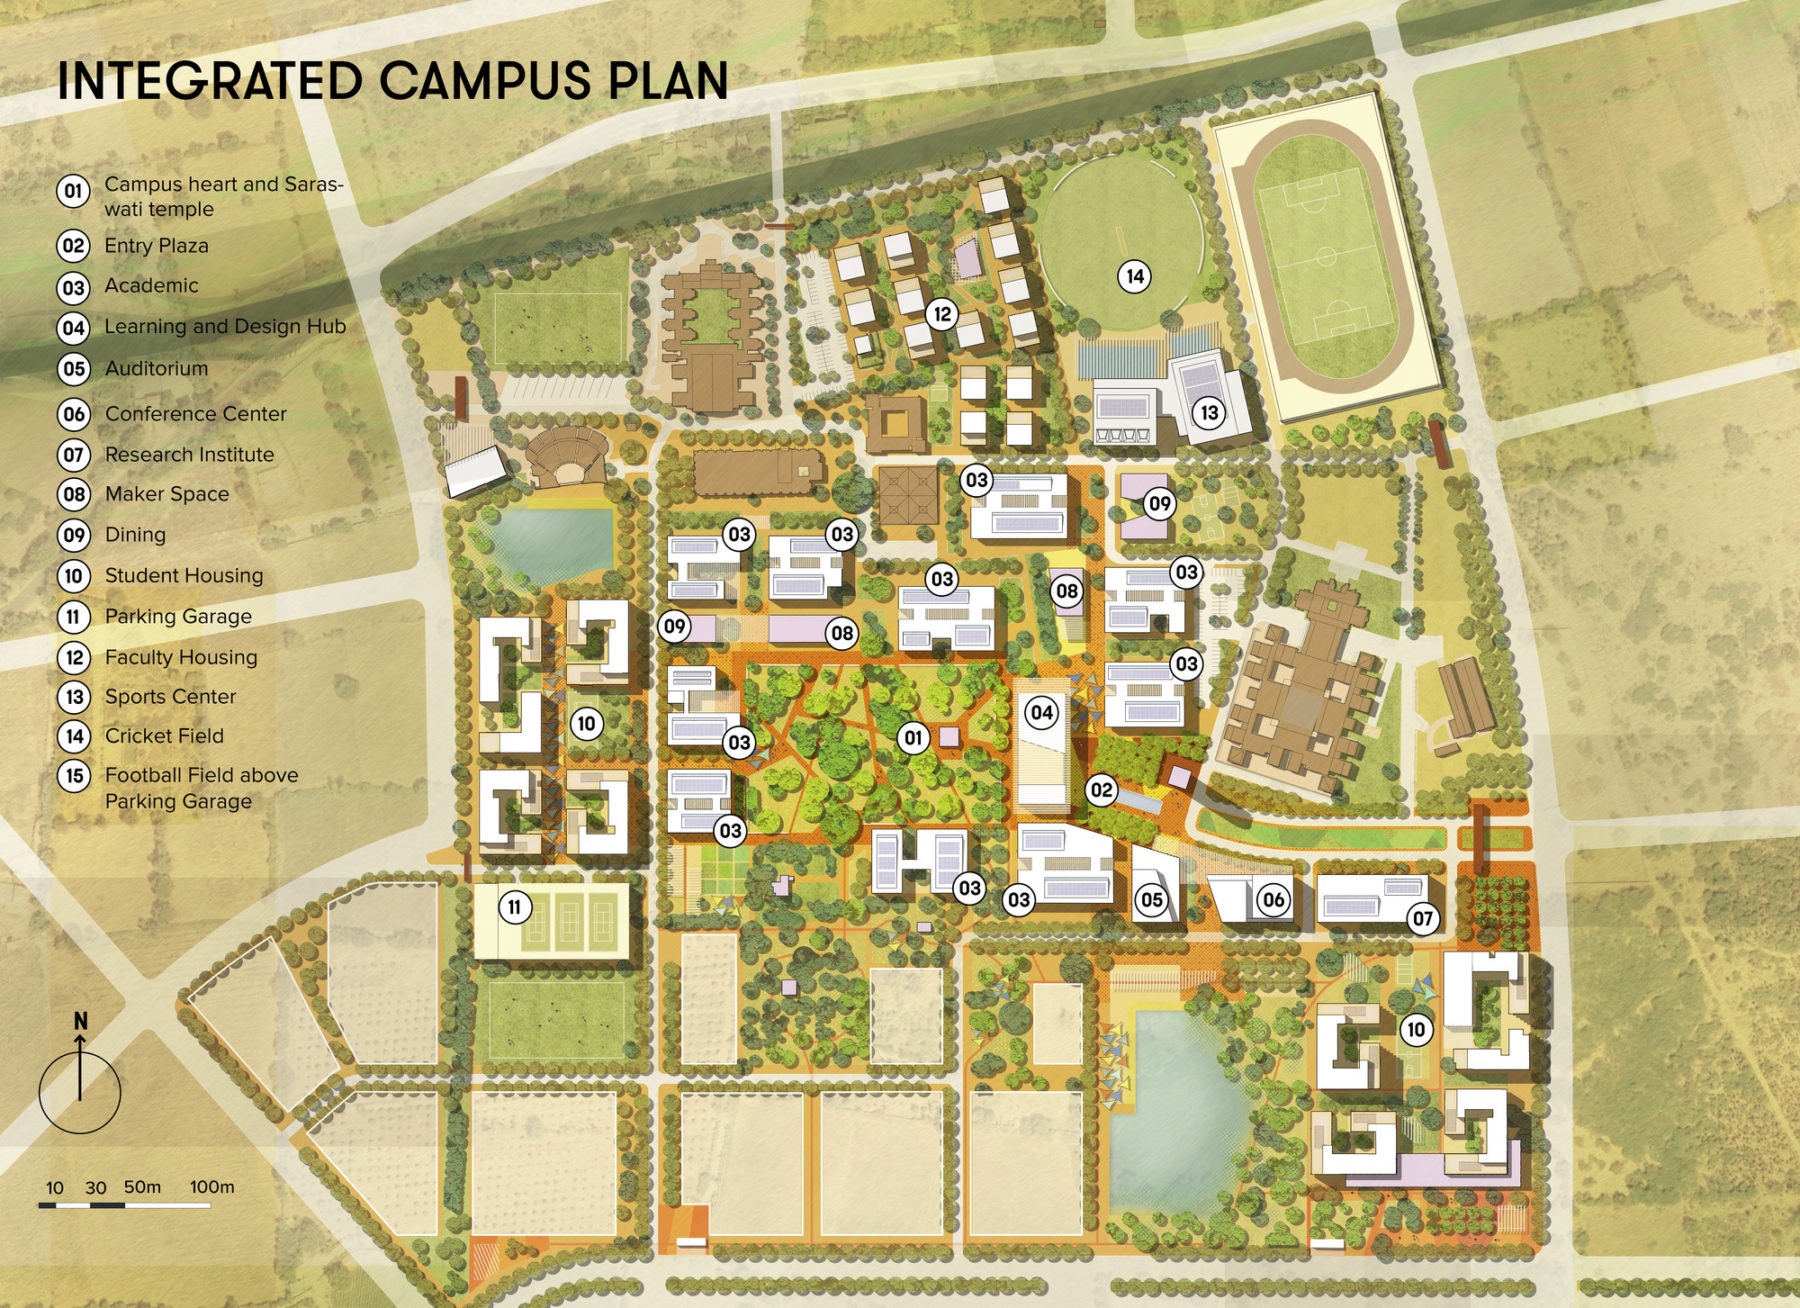 Integrated campus plan at Anant University